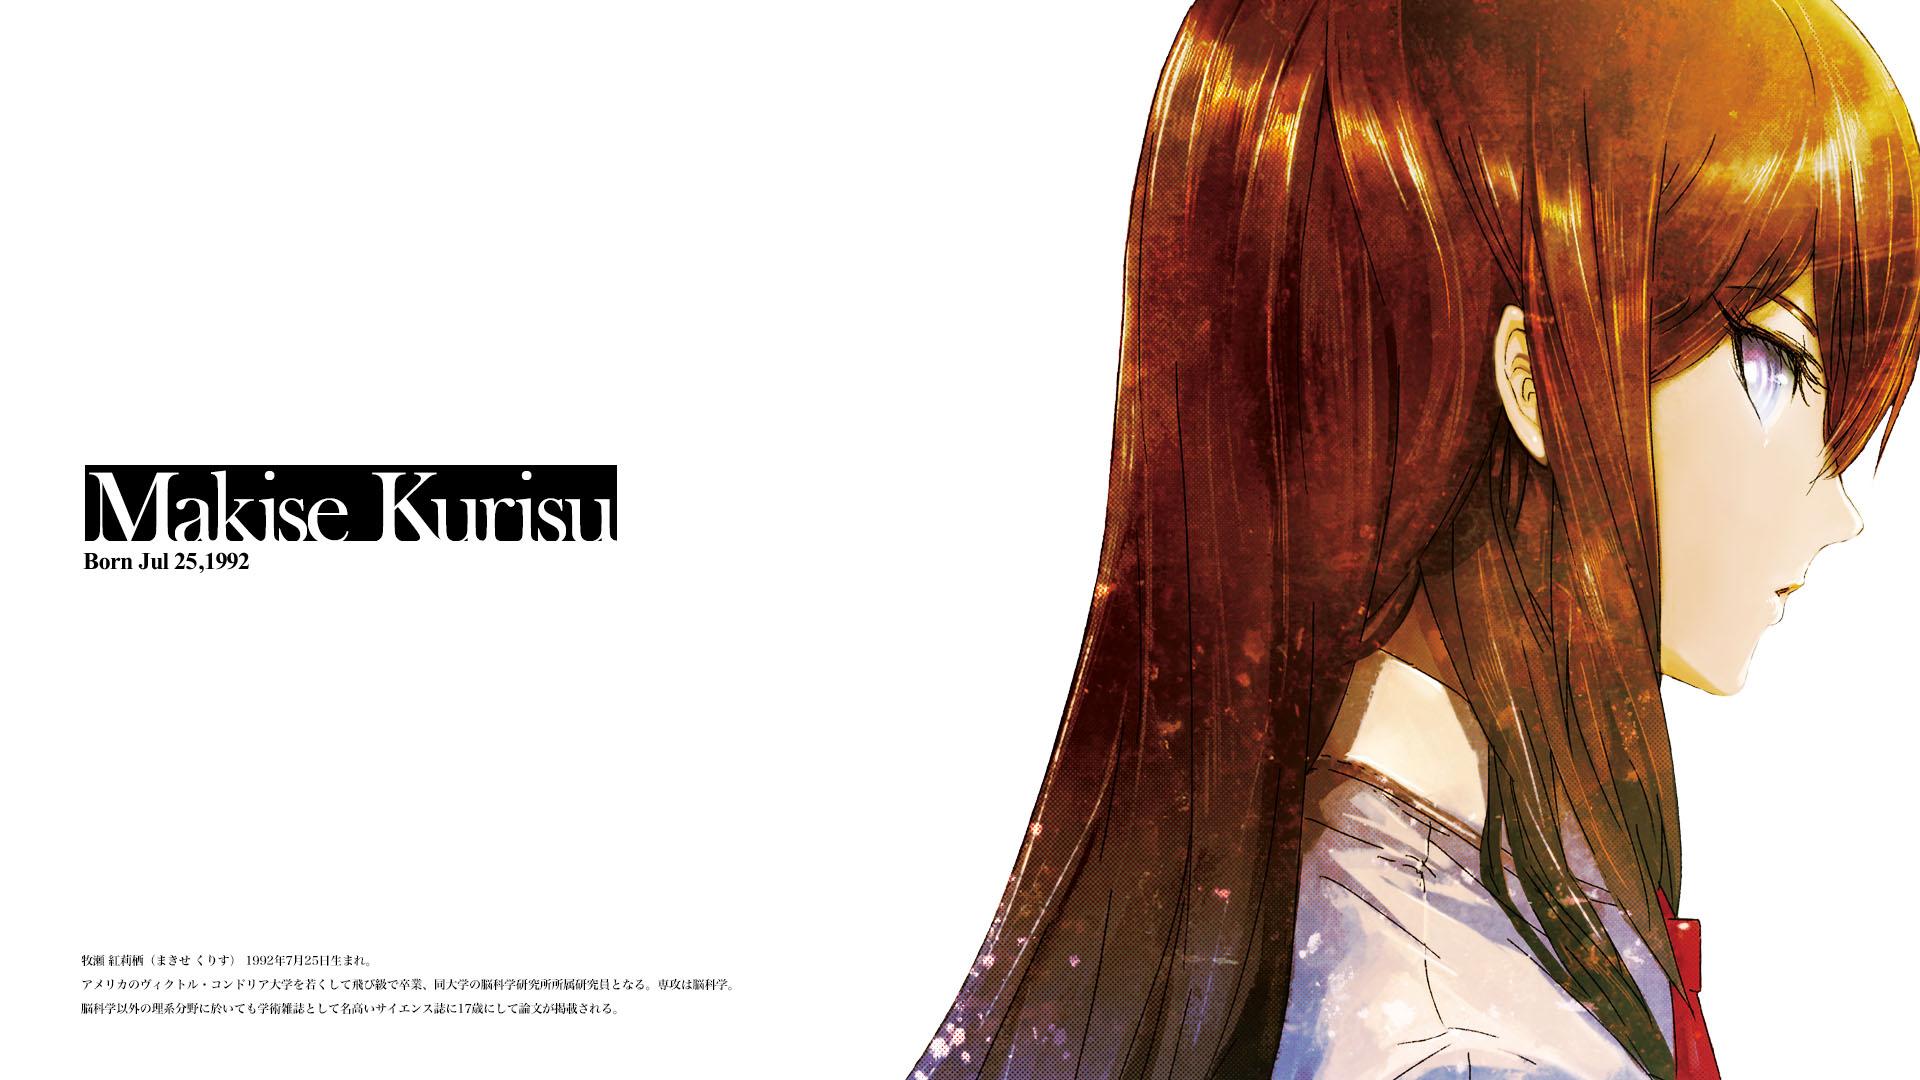 I'm searching for gorgeous Makise Kurisu wallpaper. Give me your